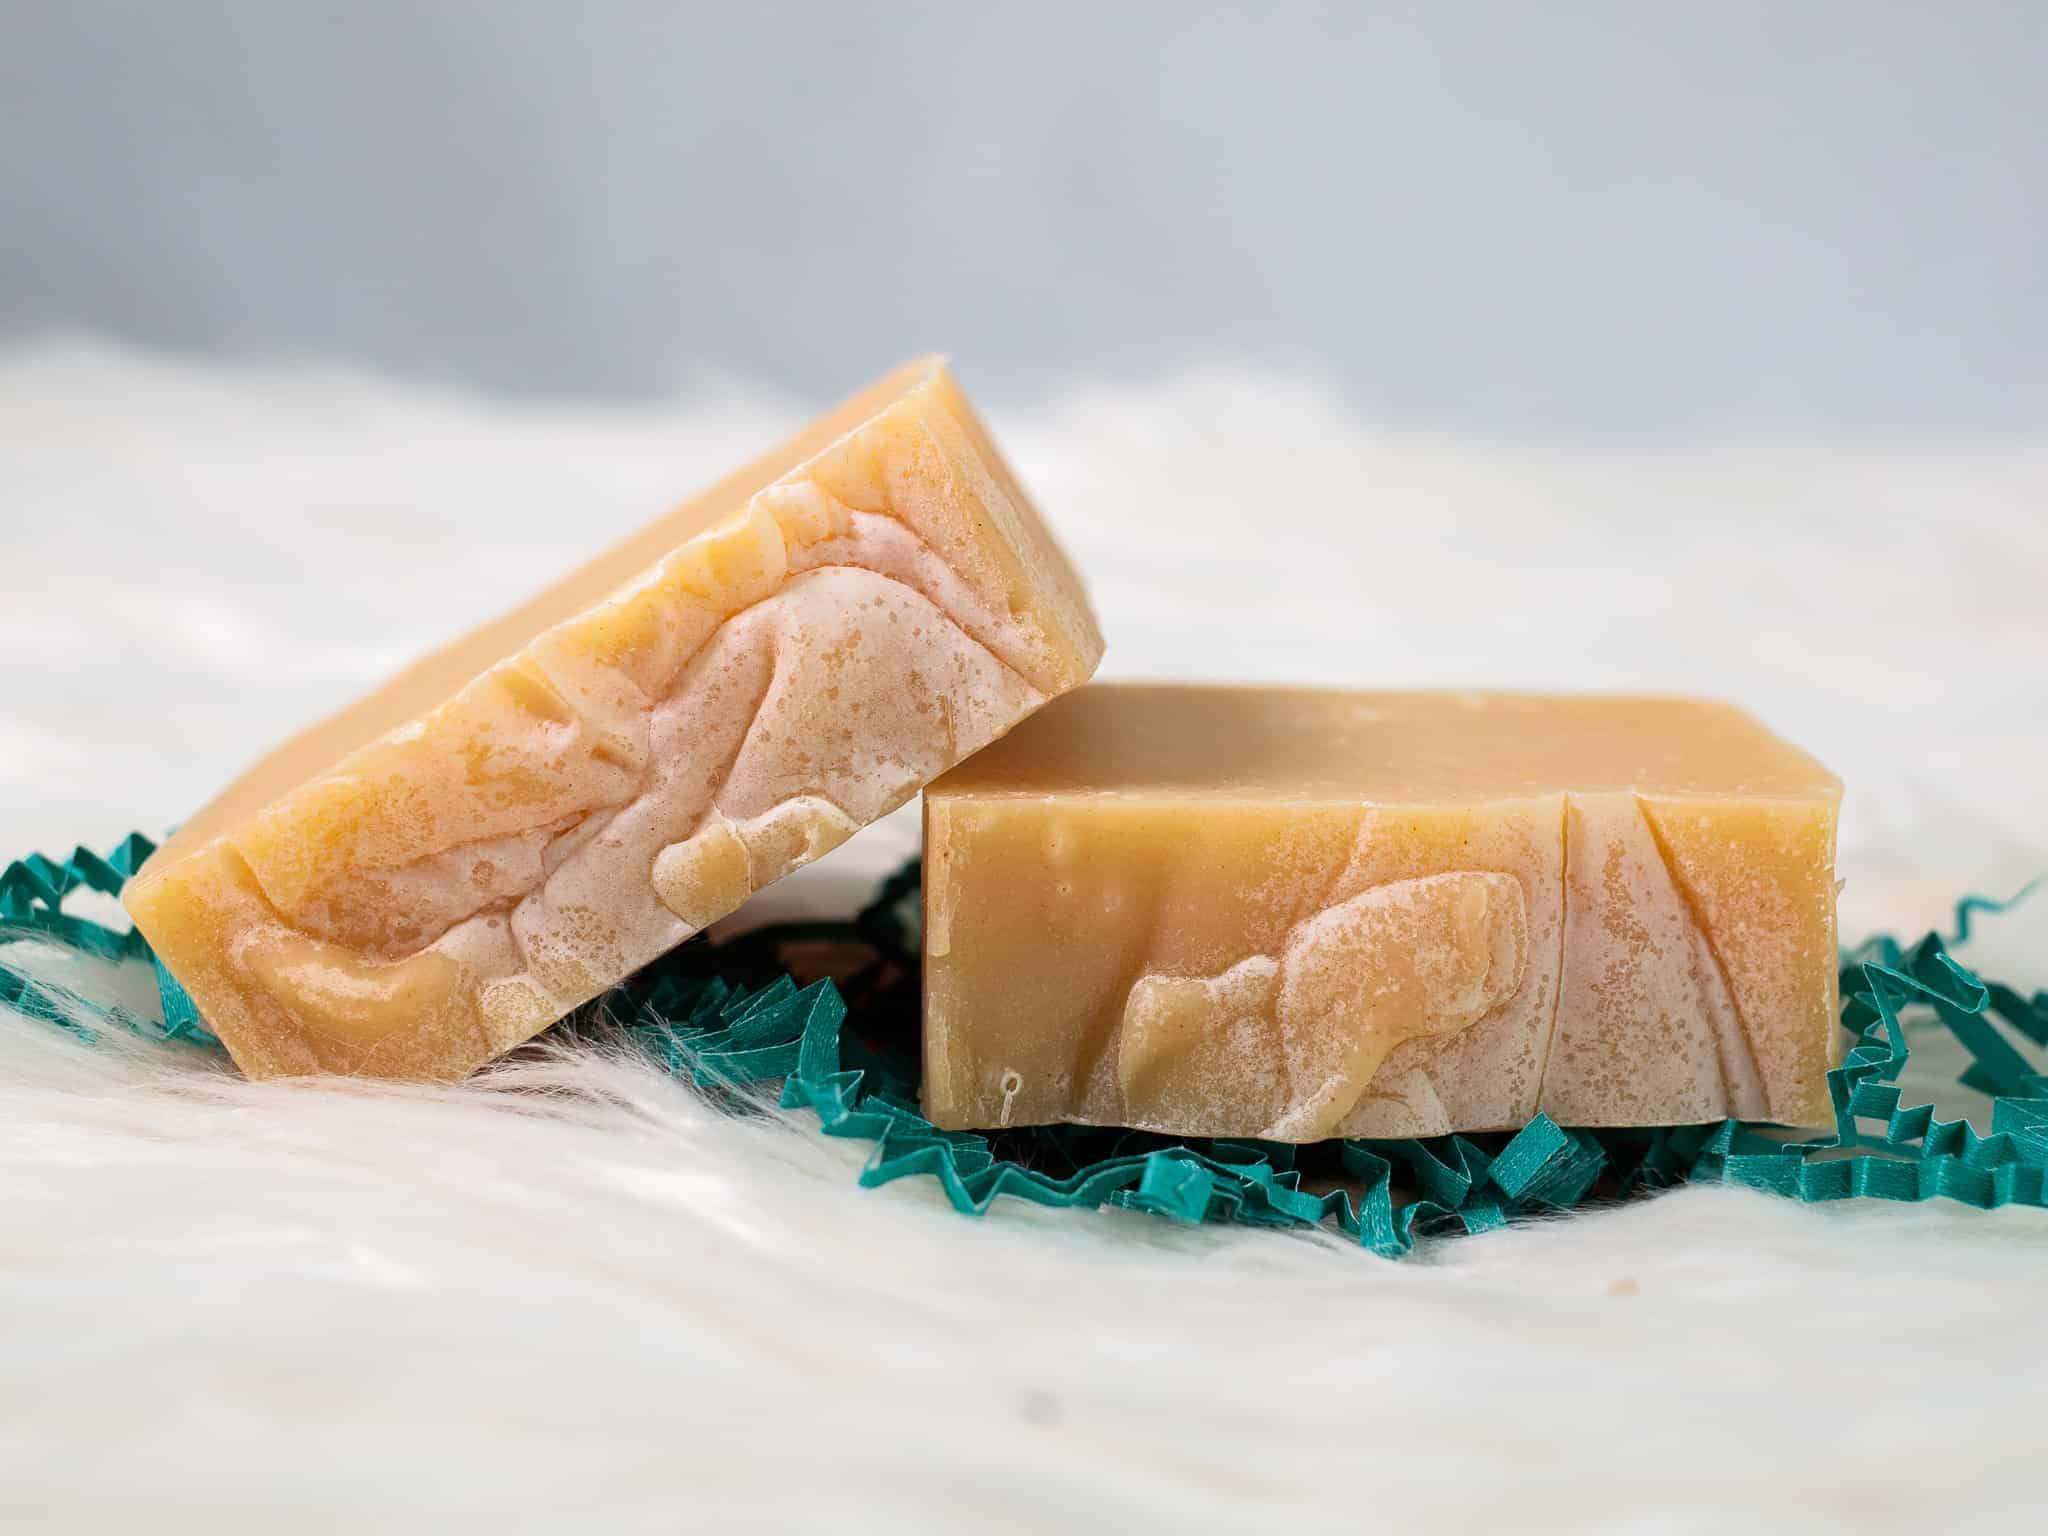 This Turmeric Soap- Vegan Specialty Bar is made with love by Sudzy Bums! Shop more unique gift ideas today with Spots Initiatives, the best way to support creators.